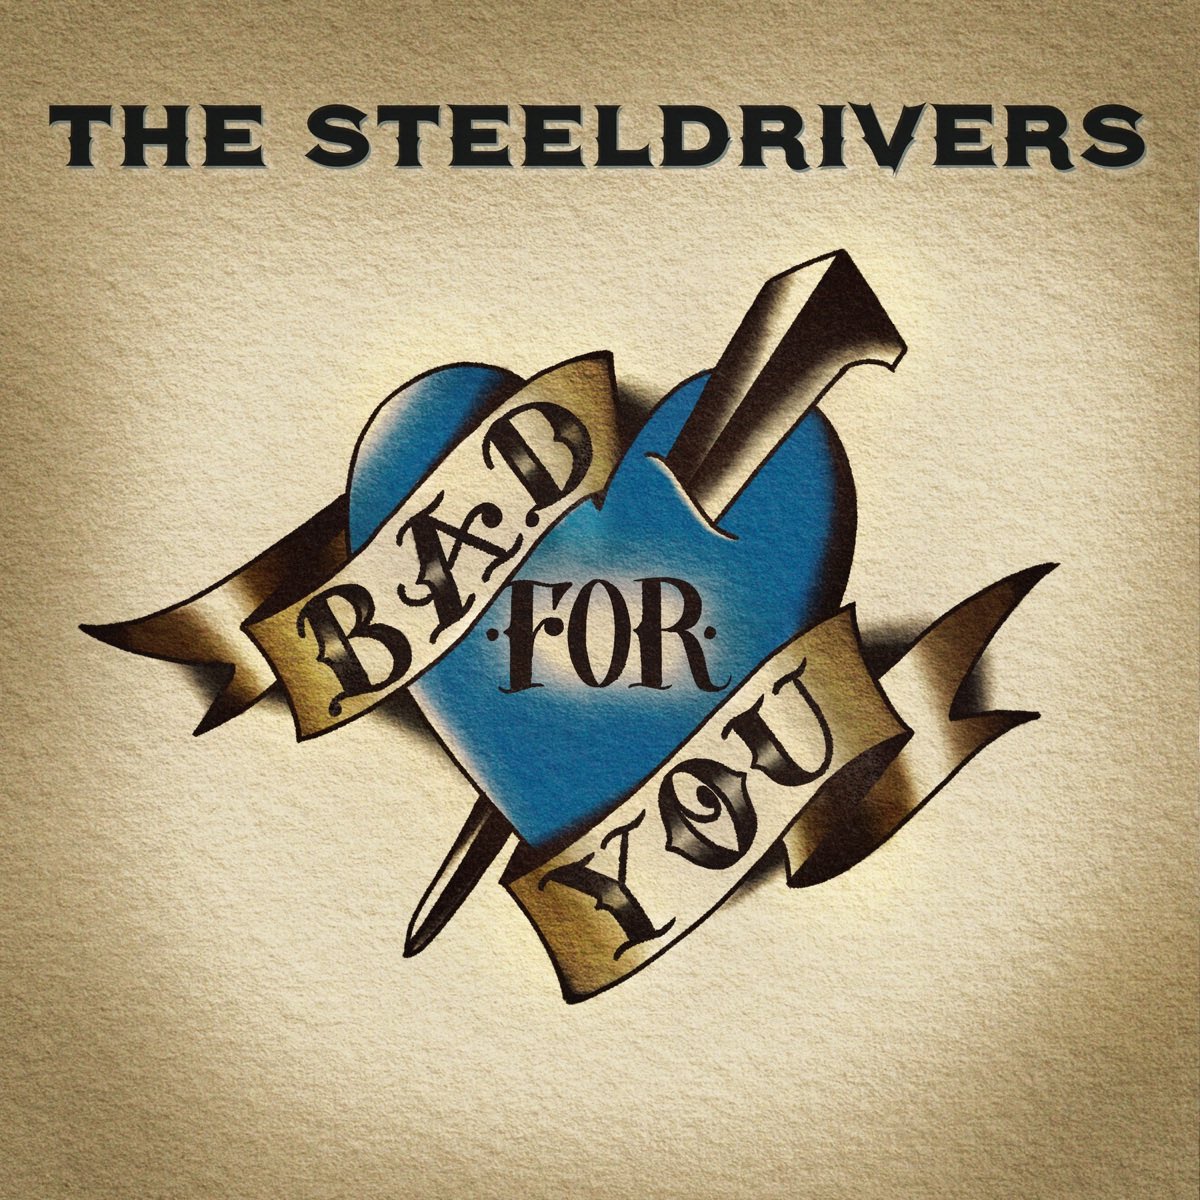 72. The Steeldrivers - Bad For You (what if I told this bluegrass outfit were a better band without Chris Stapleton?)